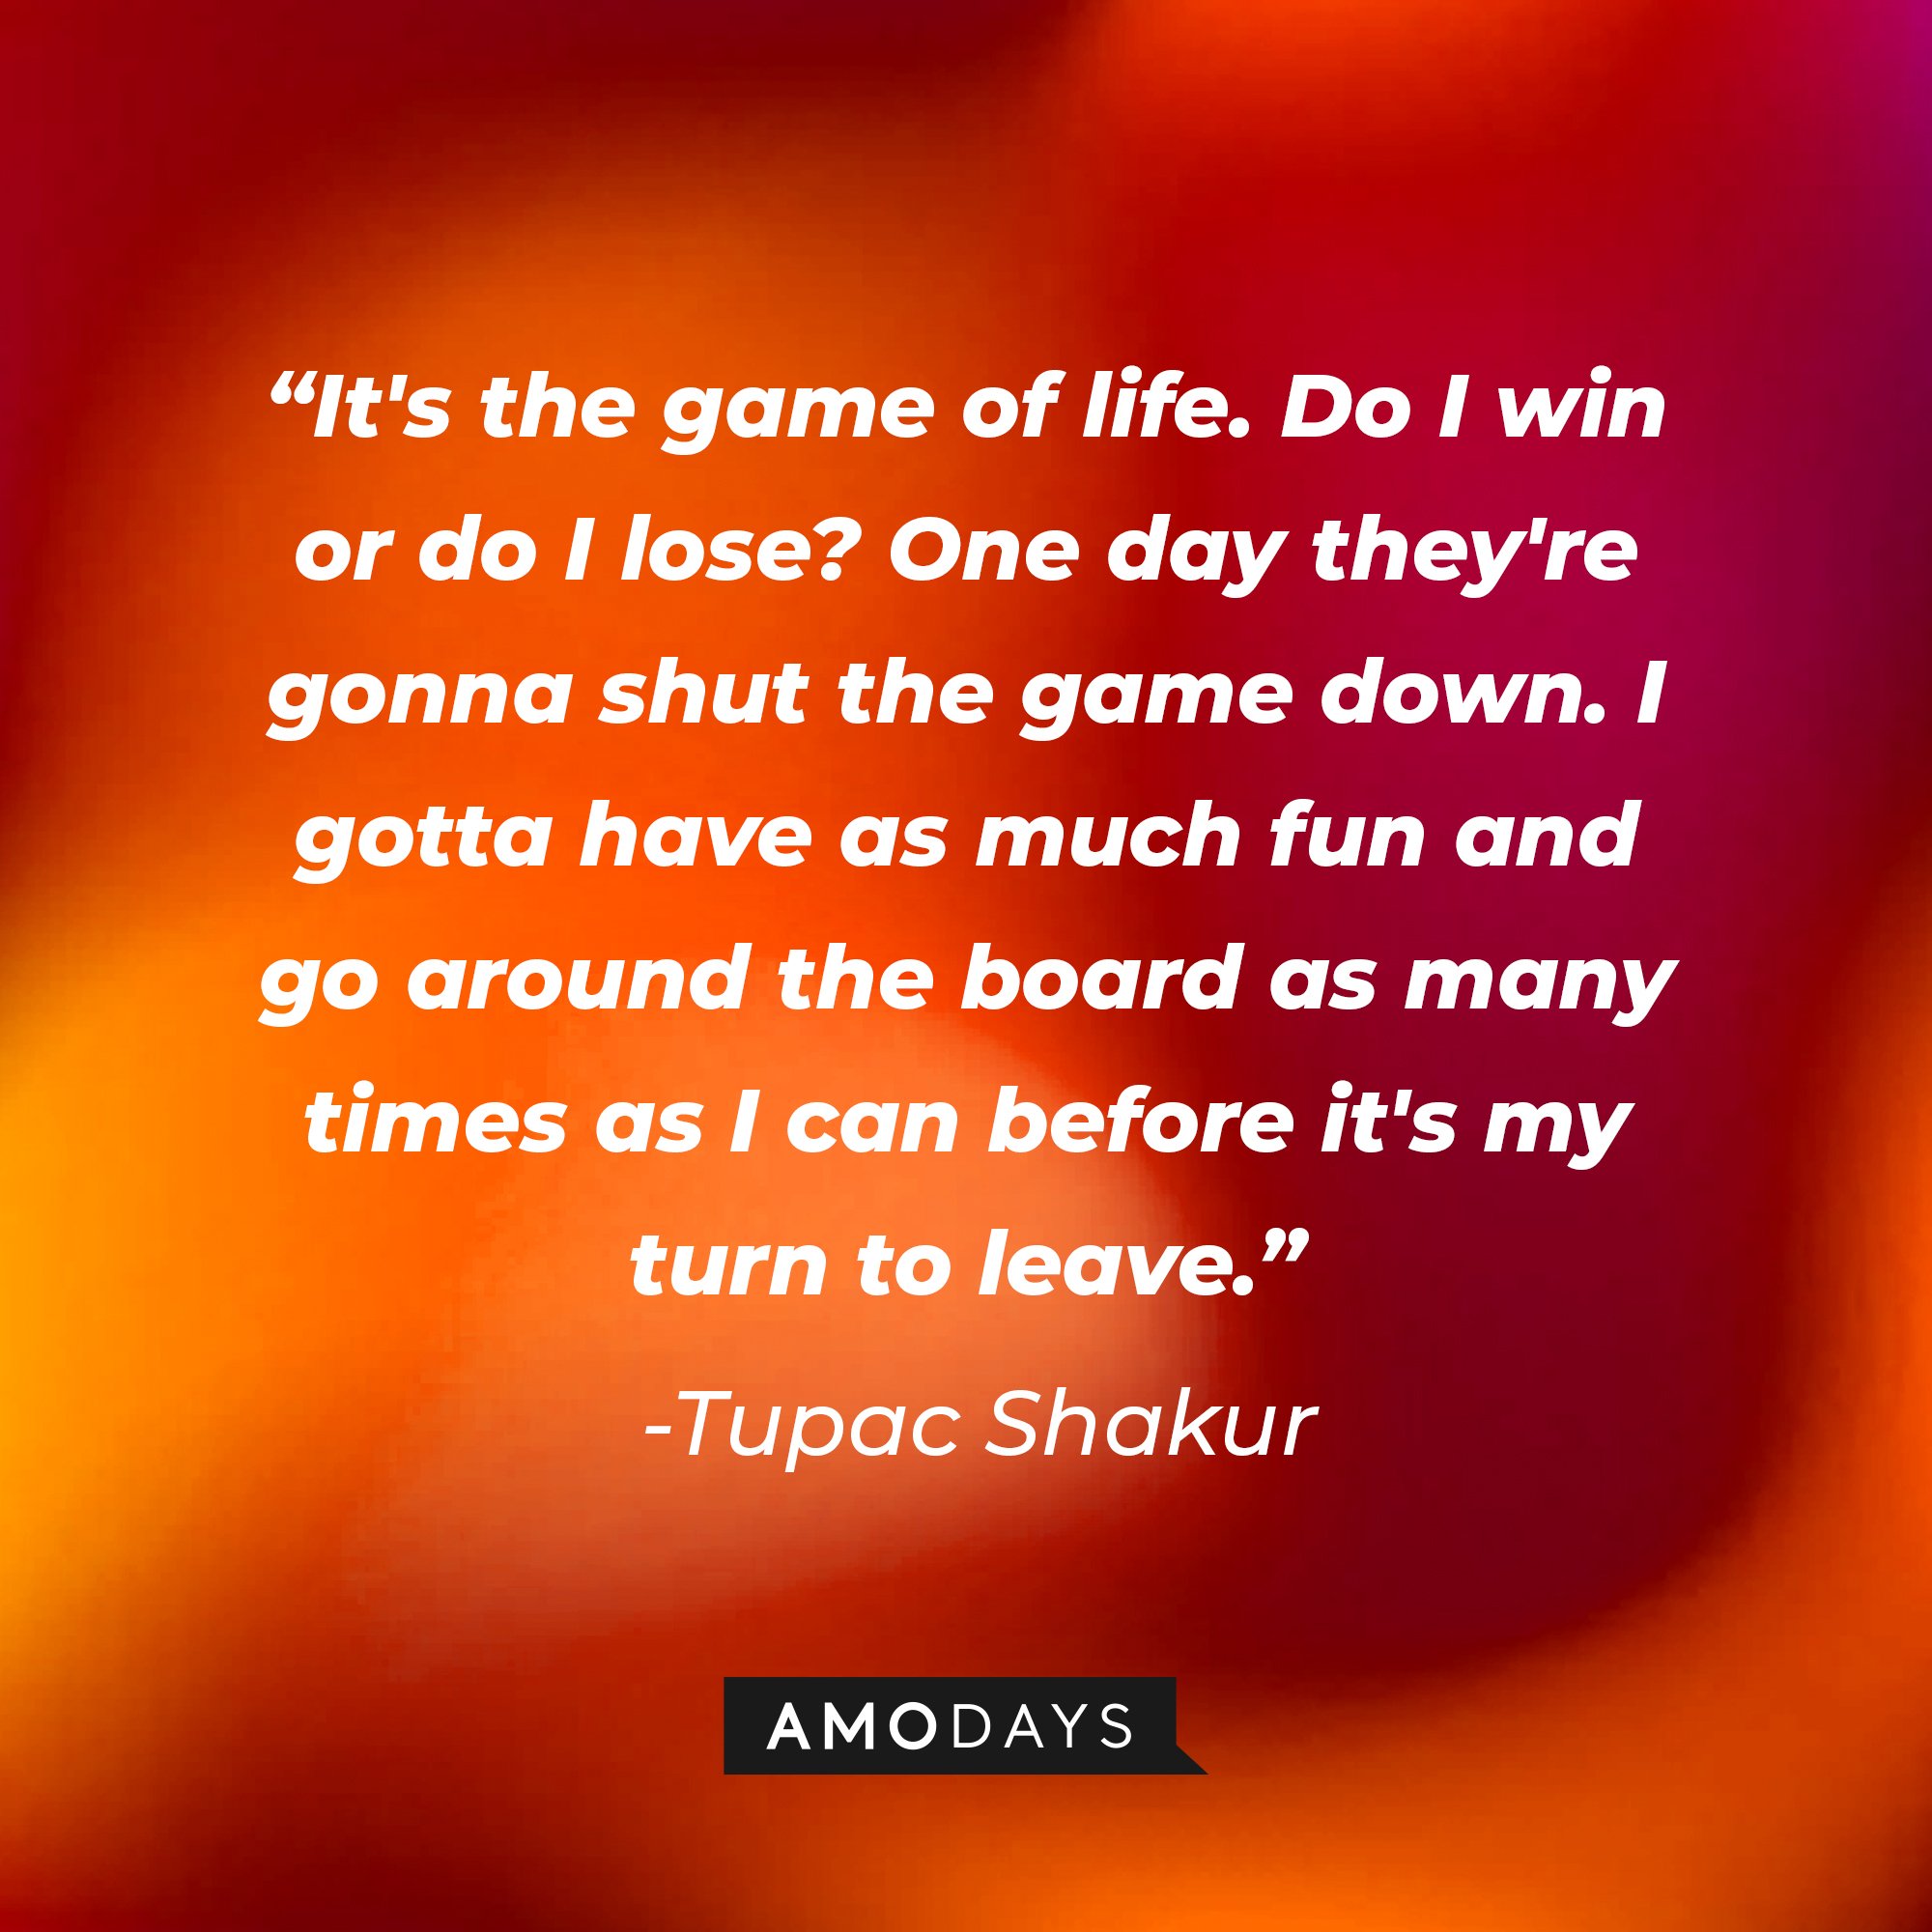 Tupac Shakur's quote: "It's the game of life. Do I win or do I lose? One day they're gonna shut the game down. I gotta have as much fun and go around the board as many times as I can before it's my turn to leave." | Image: AmoDays